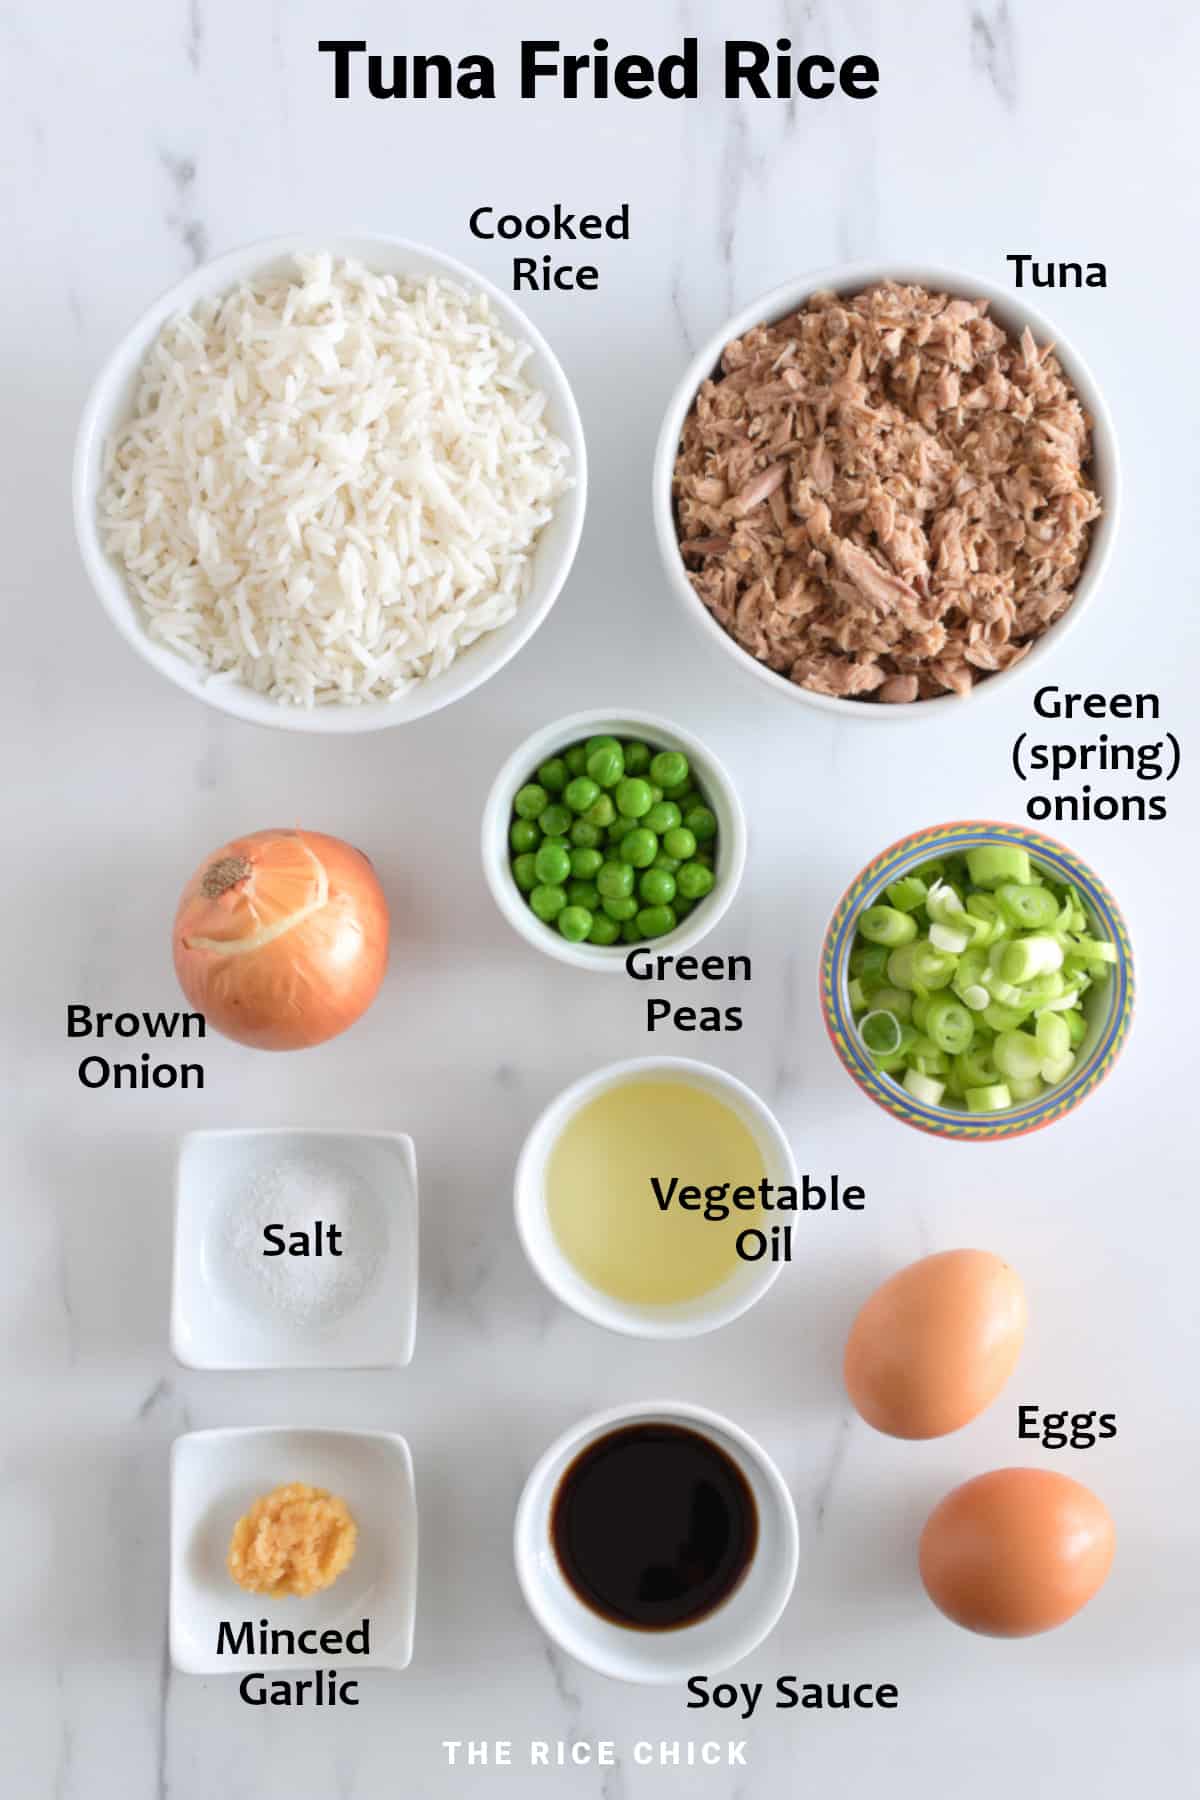 Ingredients for tuna fried rice.